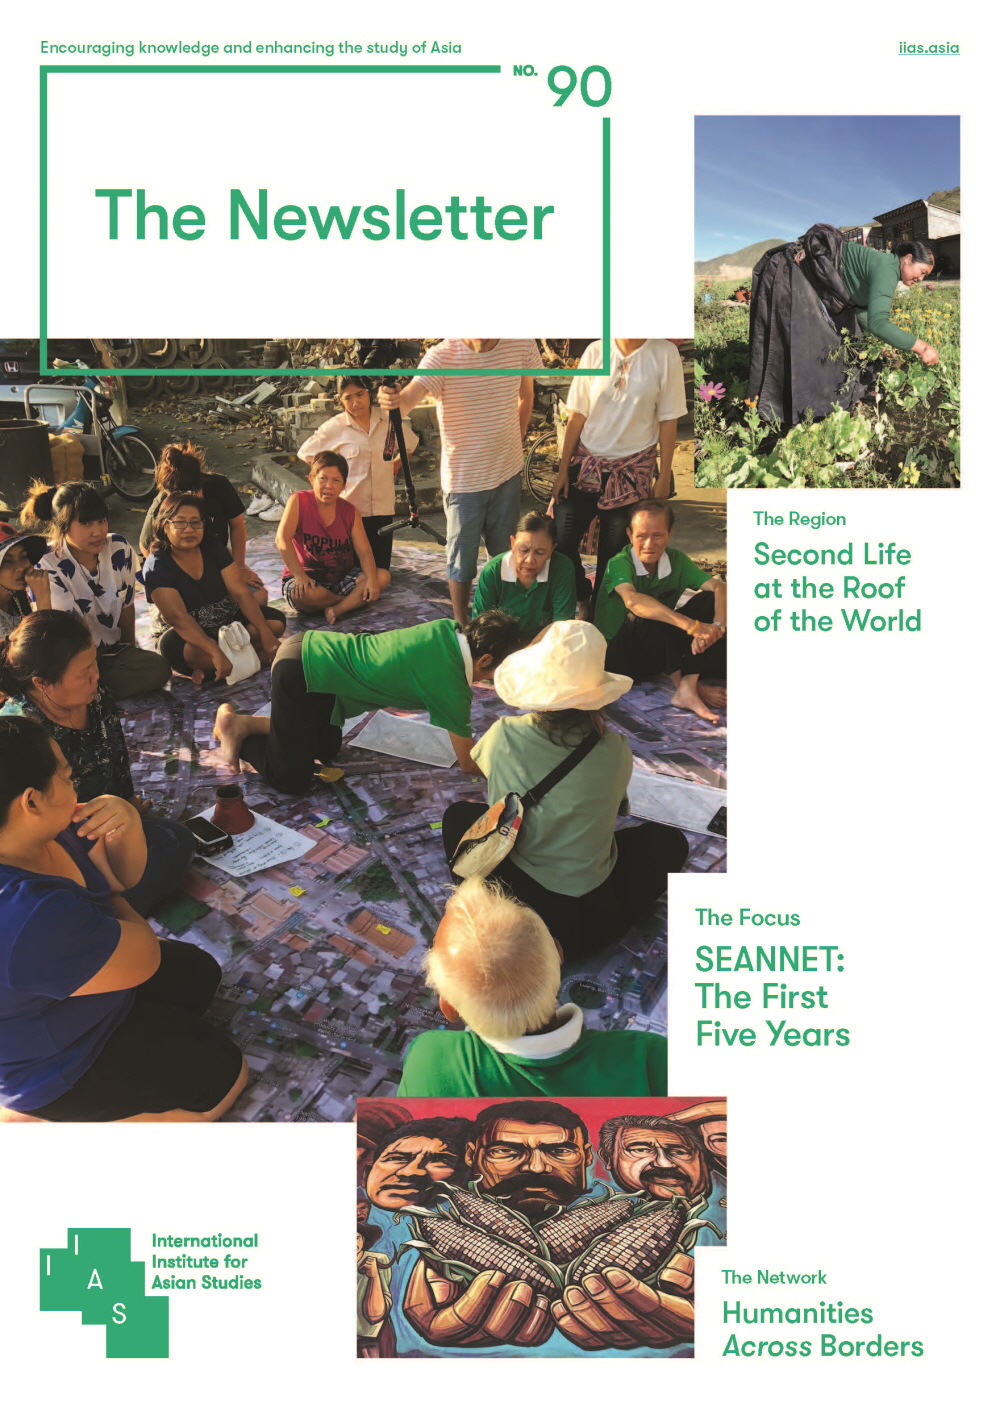 IIAS 〈The Newsletter〉 Vol. 90 – News from Northeast Asia